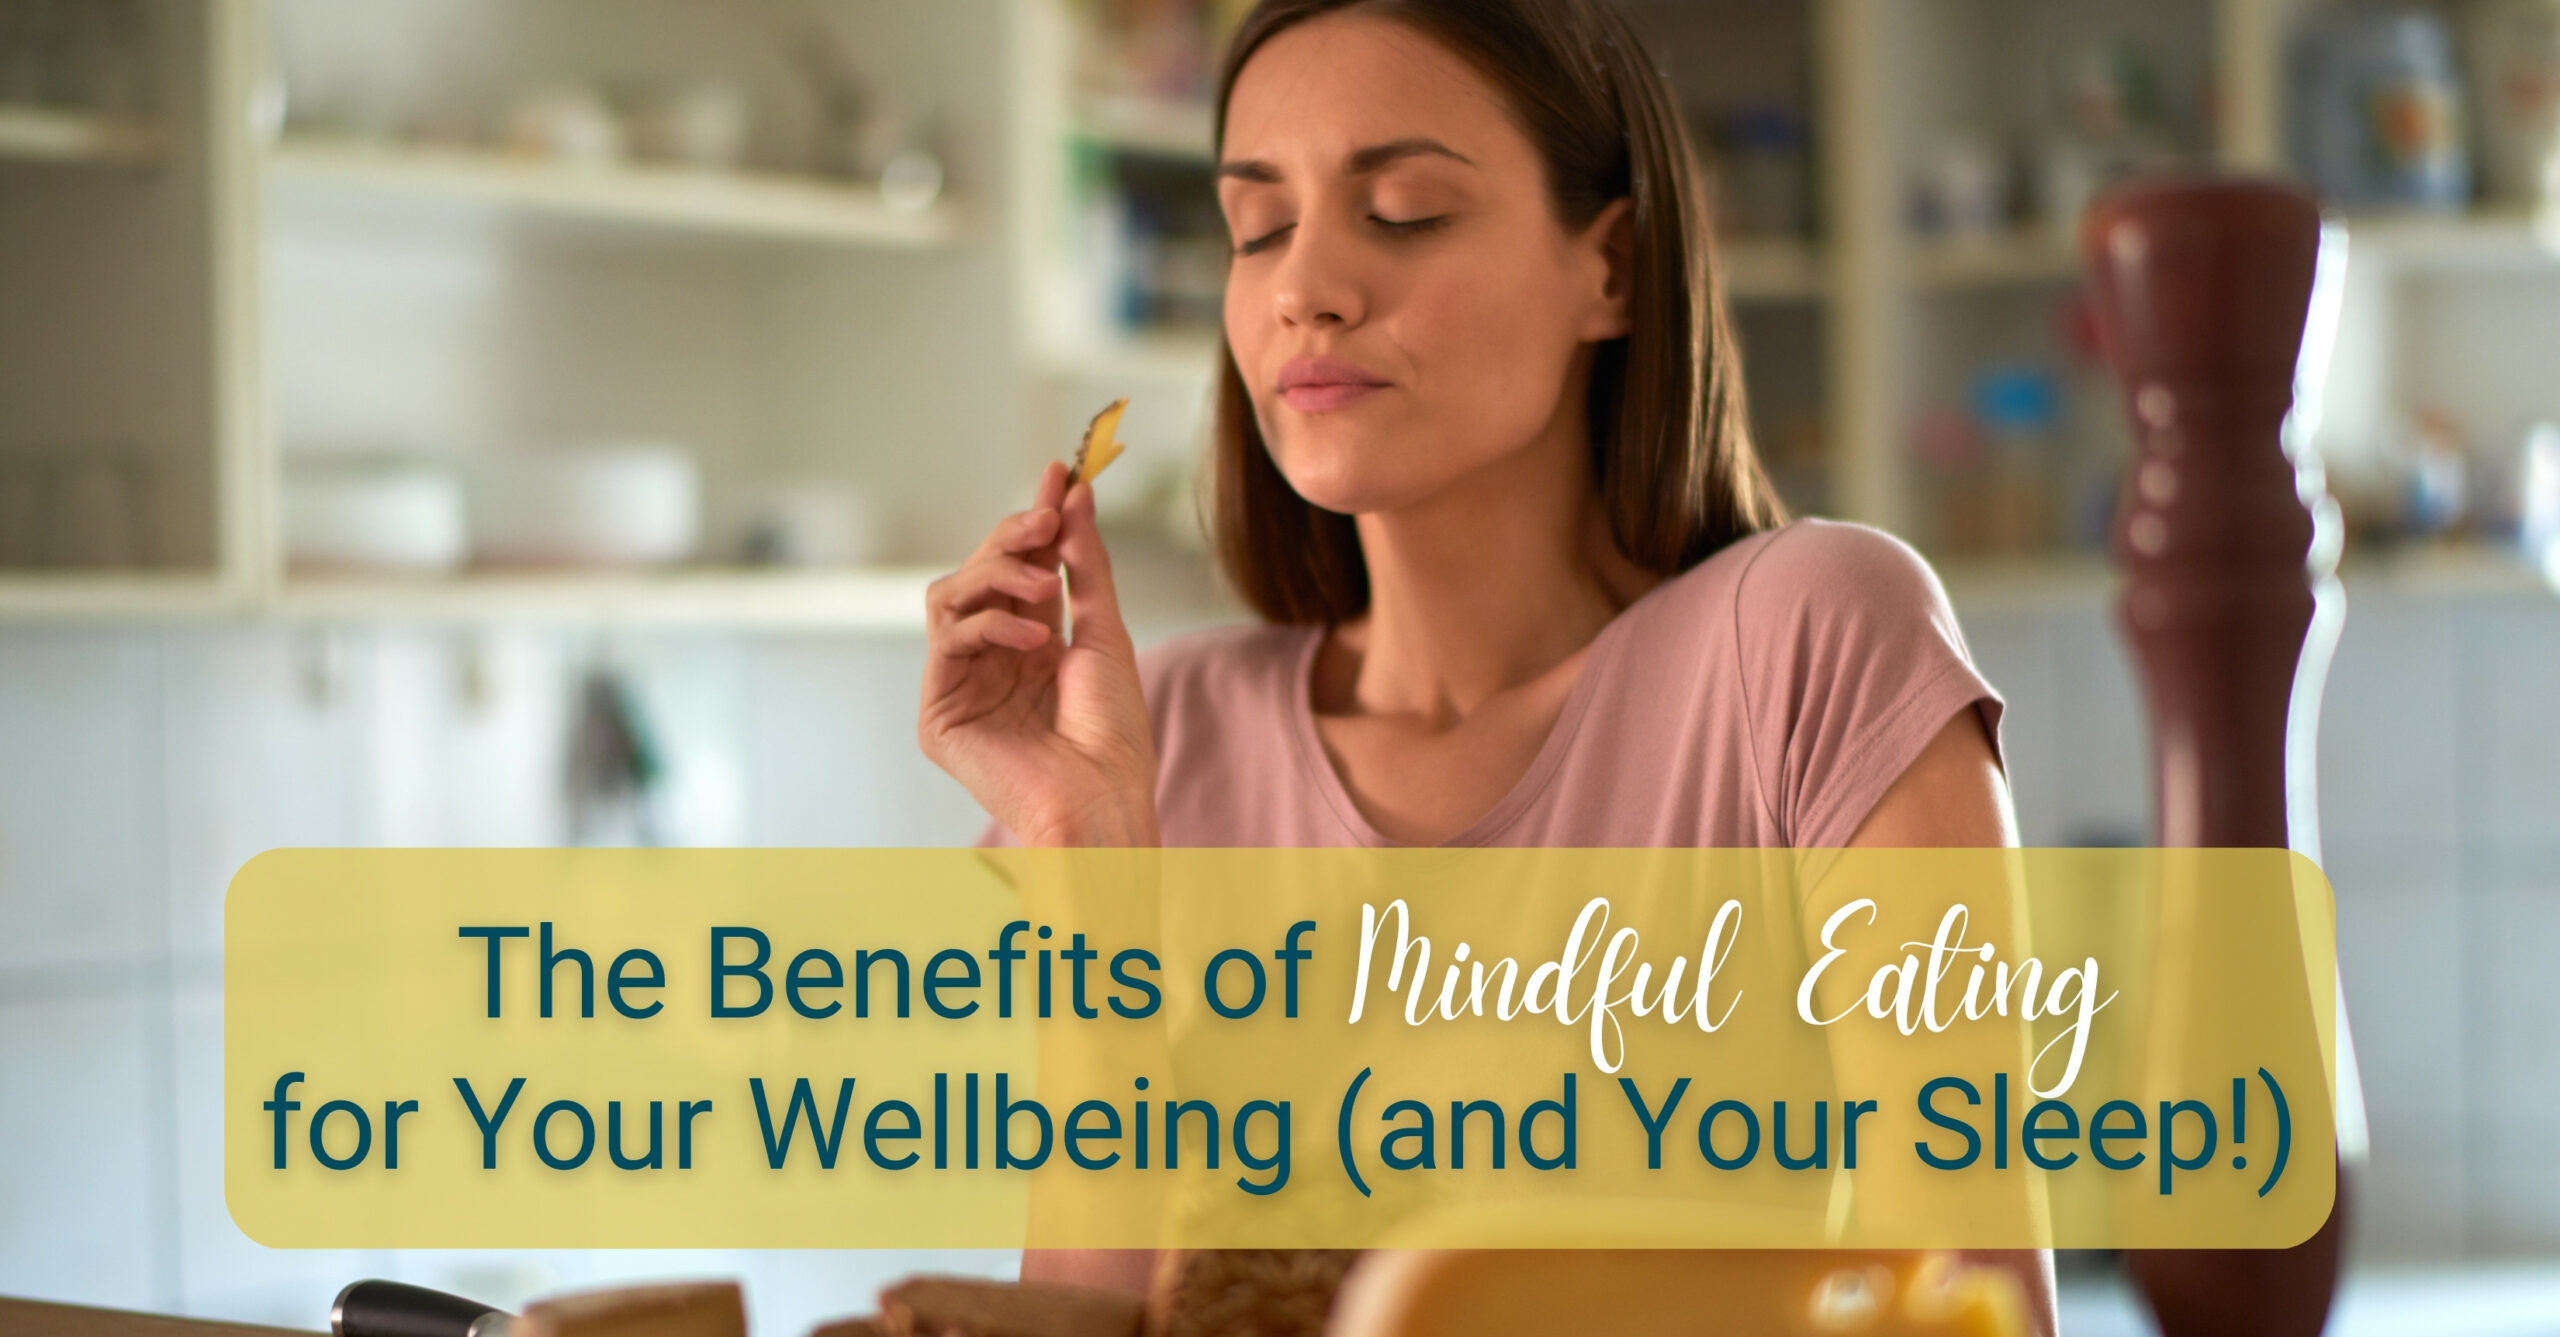 The Benefits of Mindful Eating for Your Wellbeing (and Your Sleep!) 2